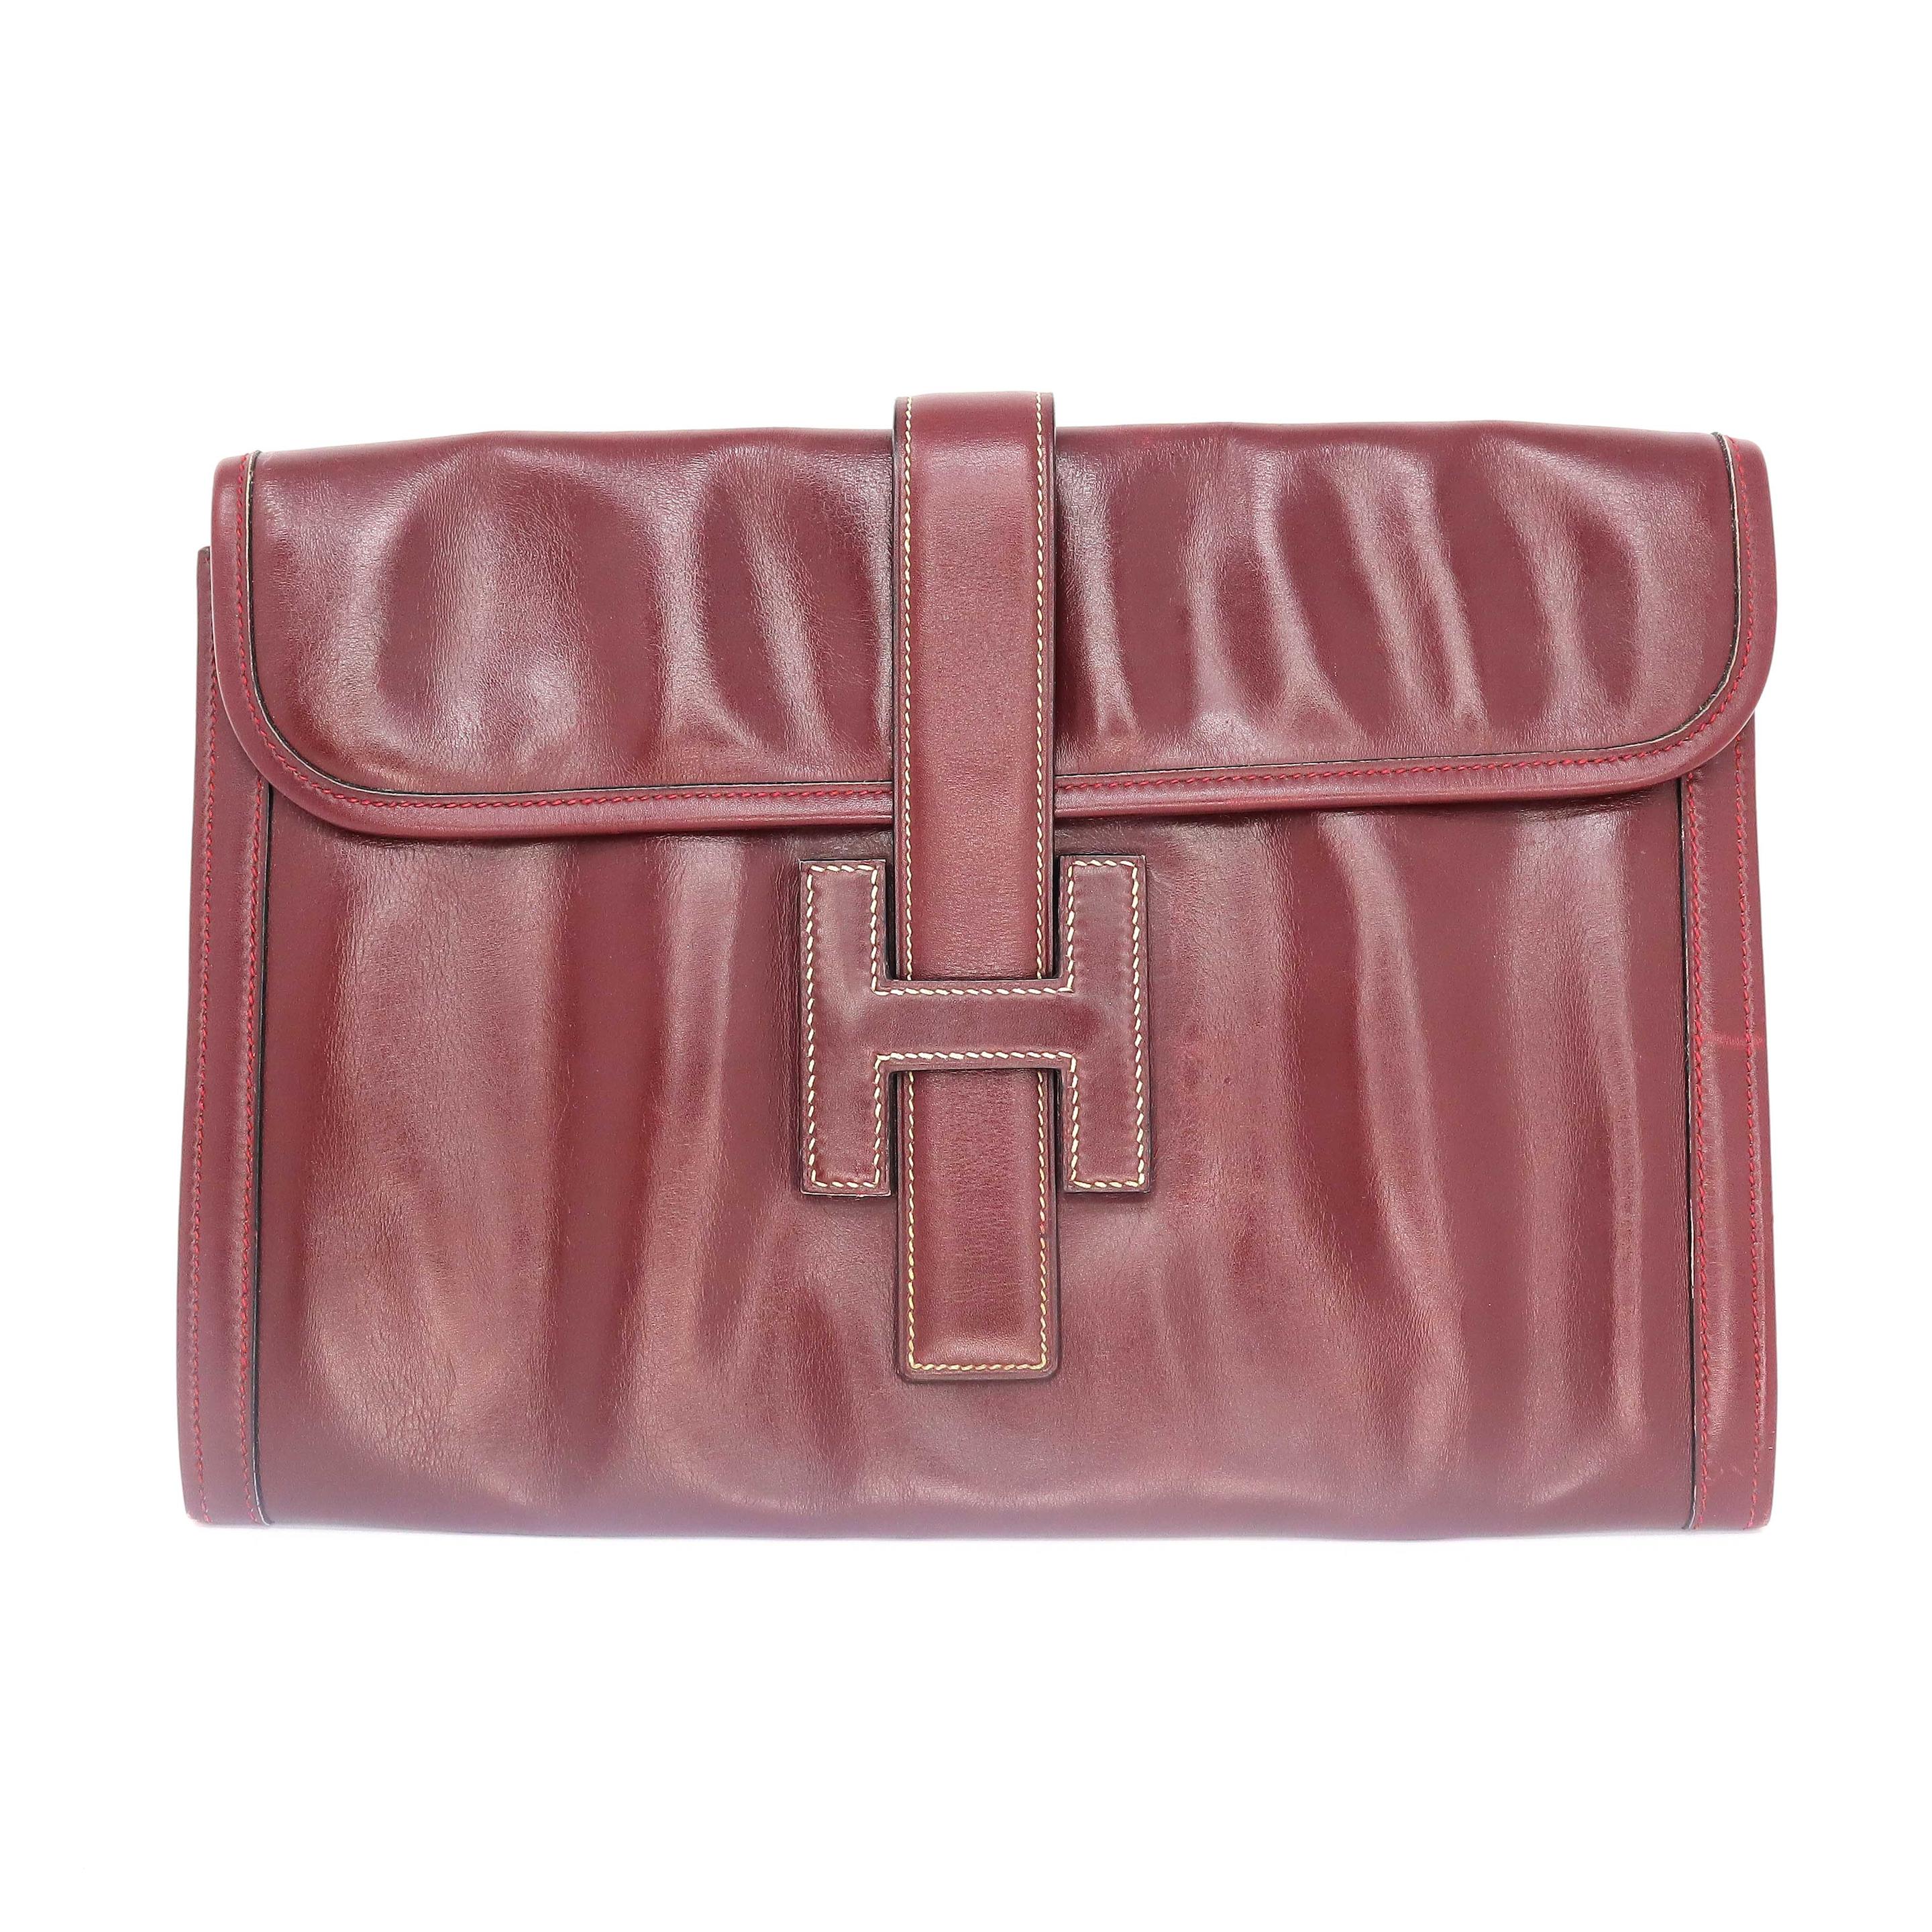 HERMES 2017 Constance Short Wallet Clutch in Ostrich Leather Rouge Vif Red